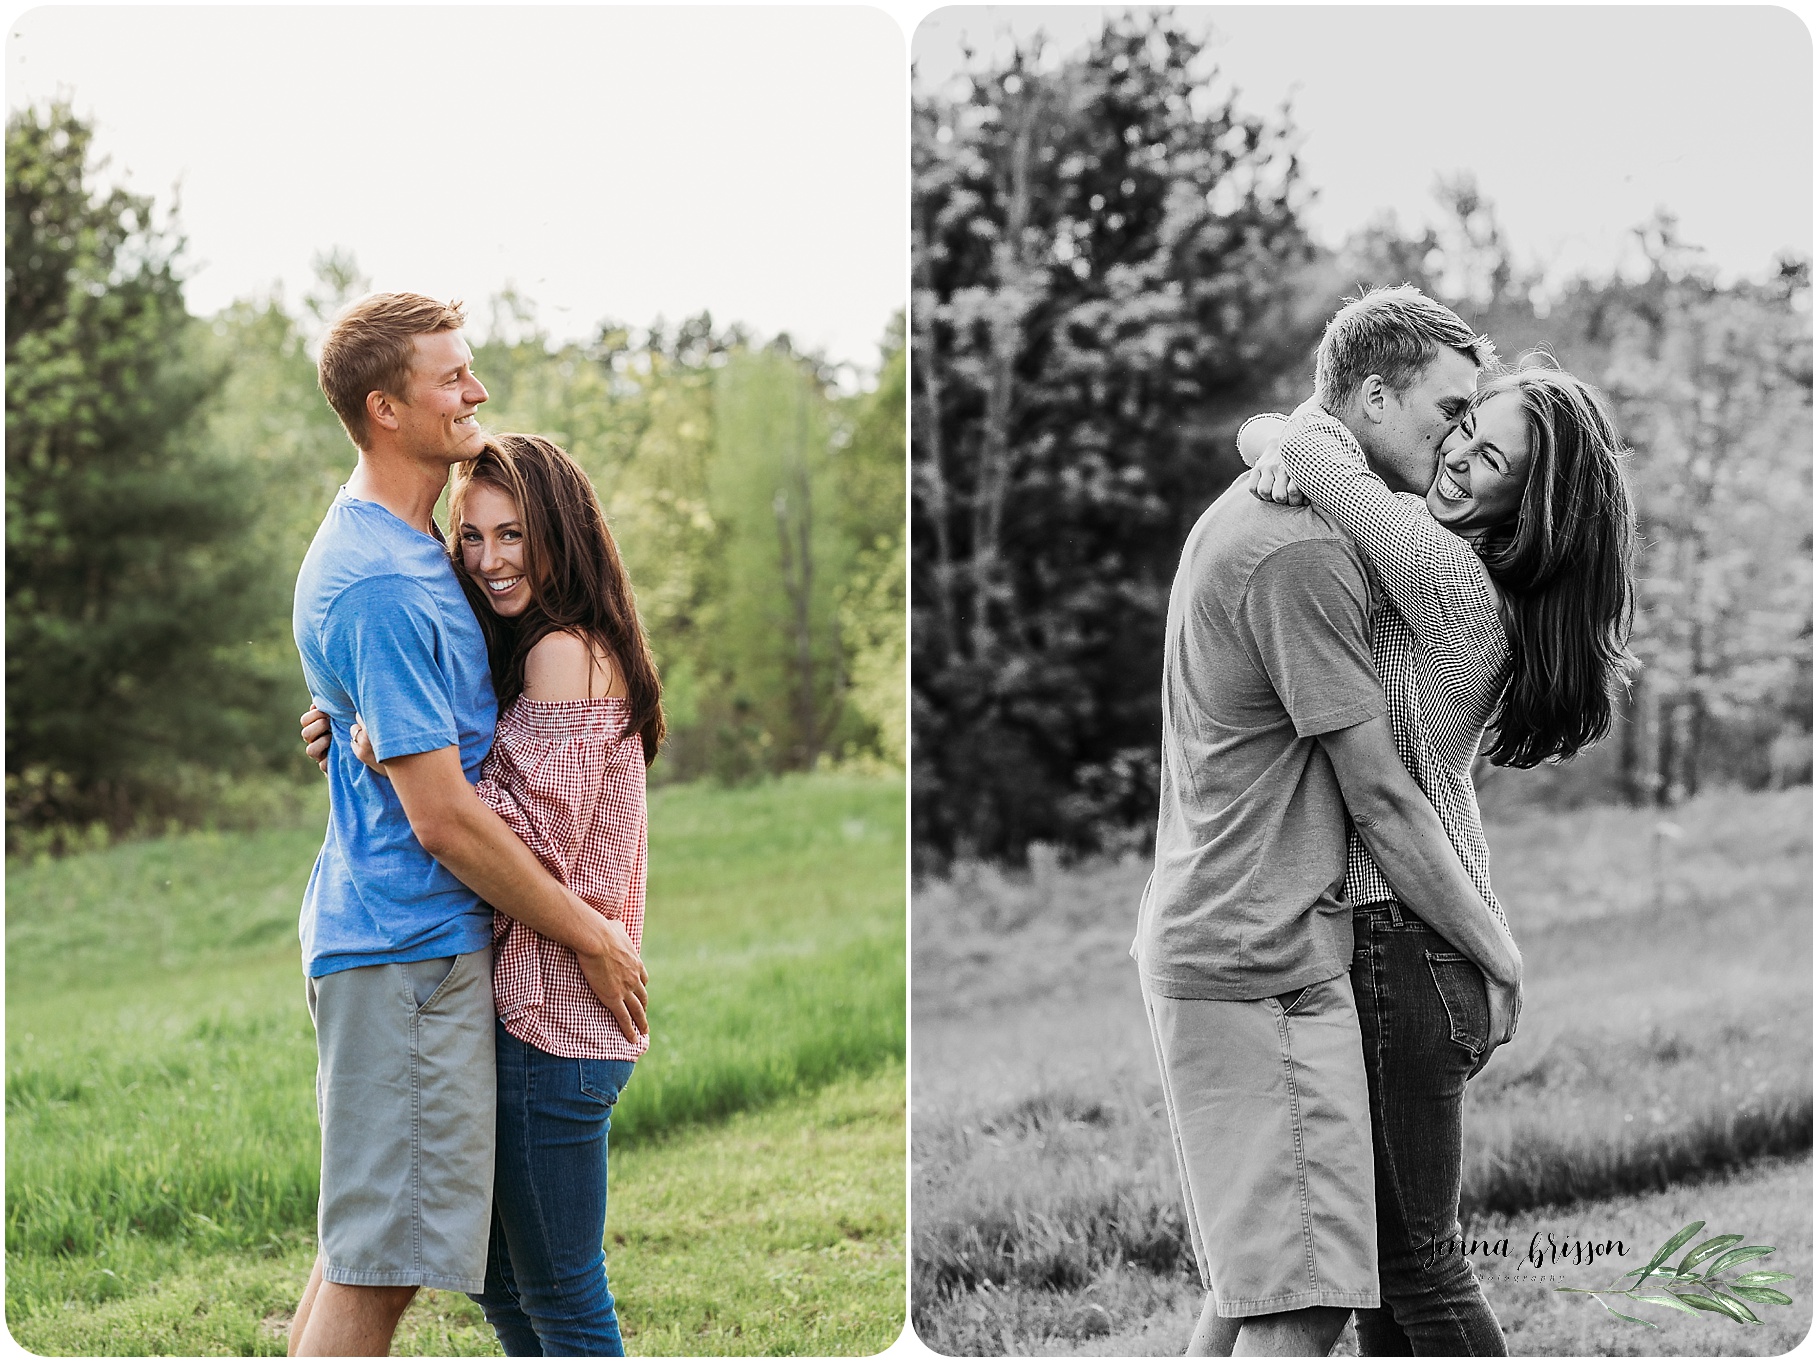 Vermont In Home Engagement Session 3 - Jenna Brisson Photography